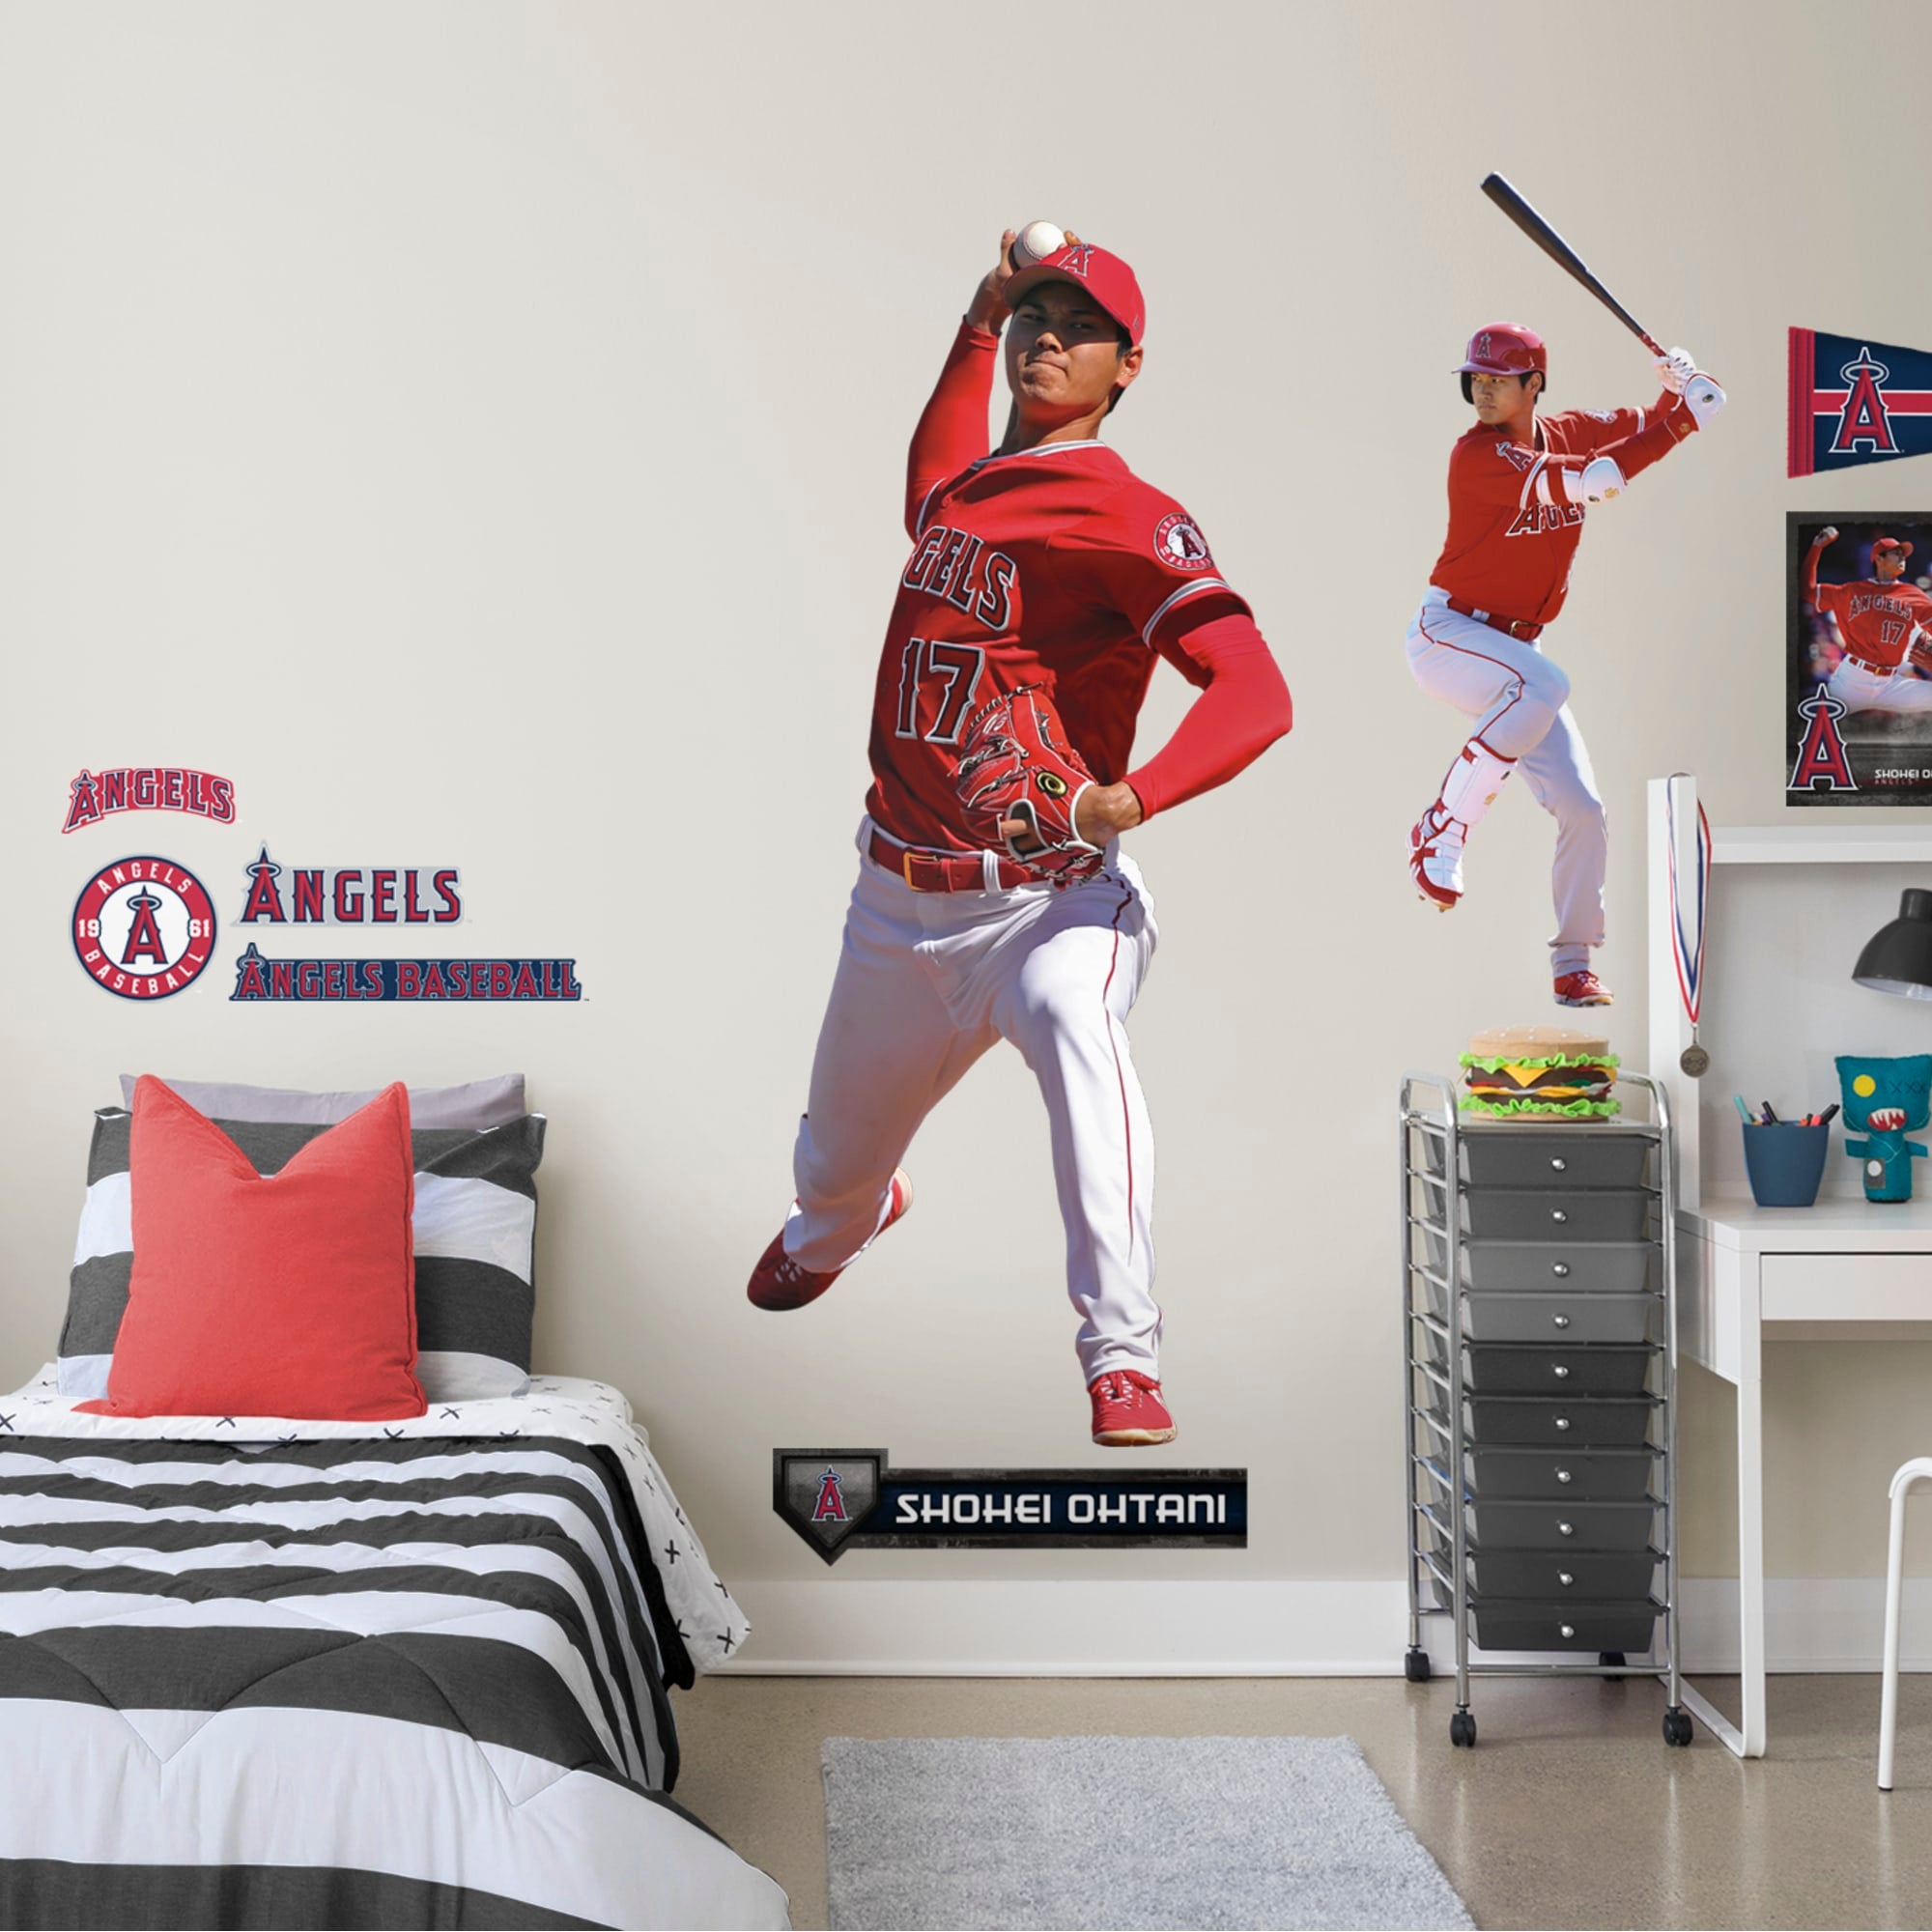 Shohei Ohtani for LA Angels - Officially Licensed MLB Removable Wall Decal Life-Size Athlete + 12 Decals (35"W x 78"H) by Fathea